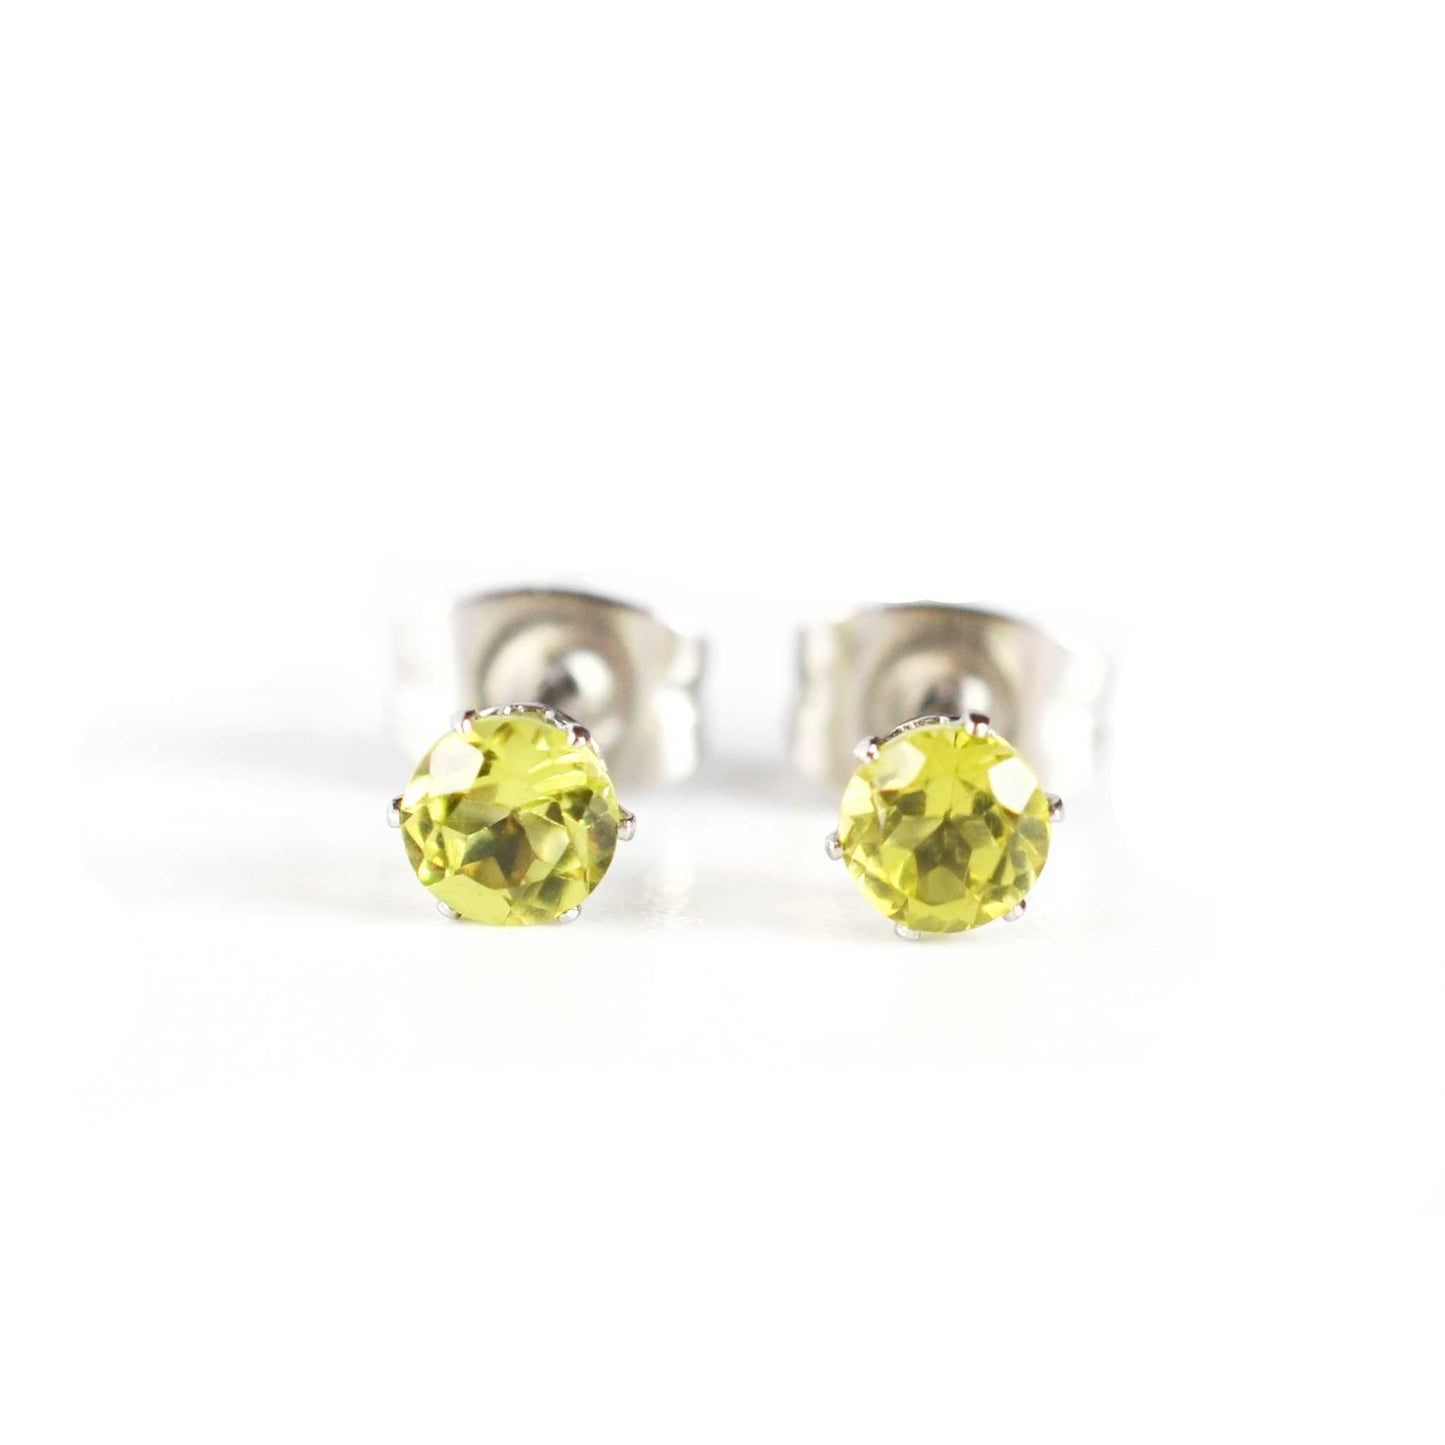 Front view of tiny faceted Peridot gemstone stud earrings on white background